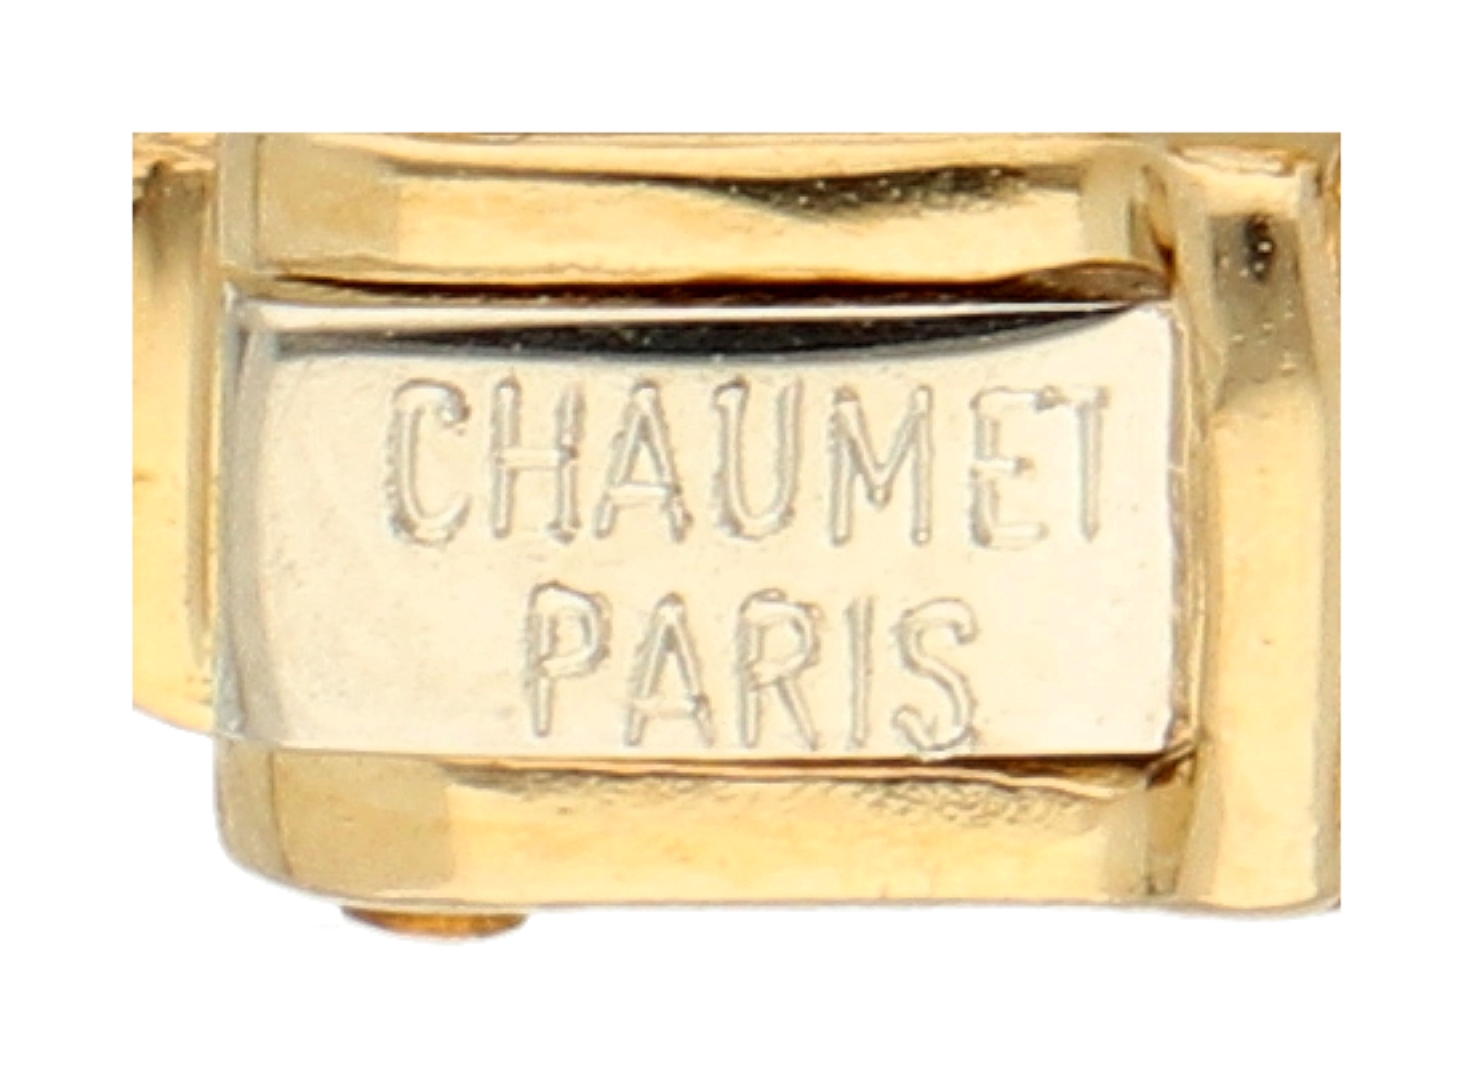 No Reserve - Chaumet 18K yellow gold earrings 'Toi je t'aime' with bois d'amourette. - Image 4 of 7